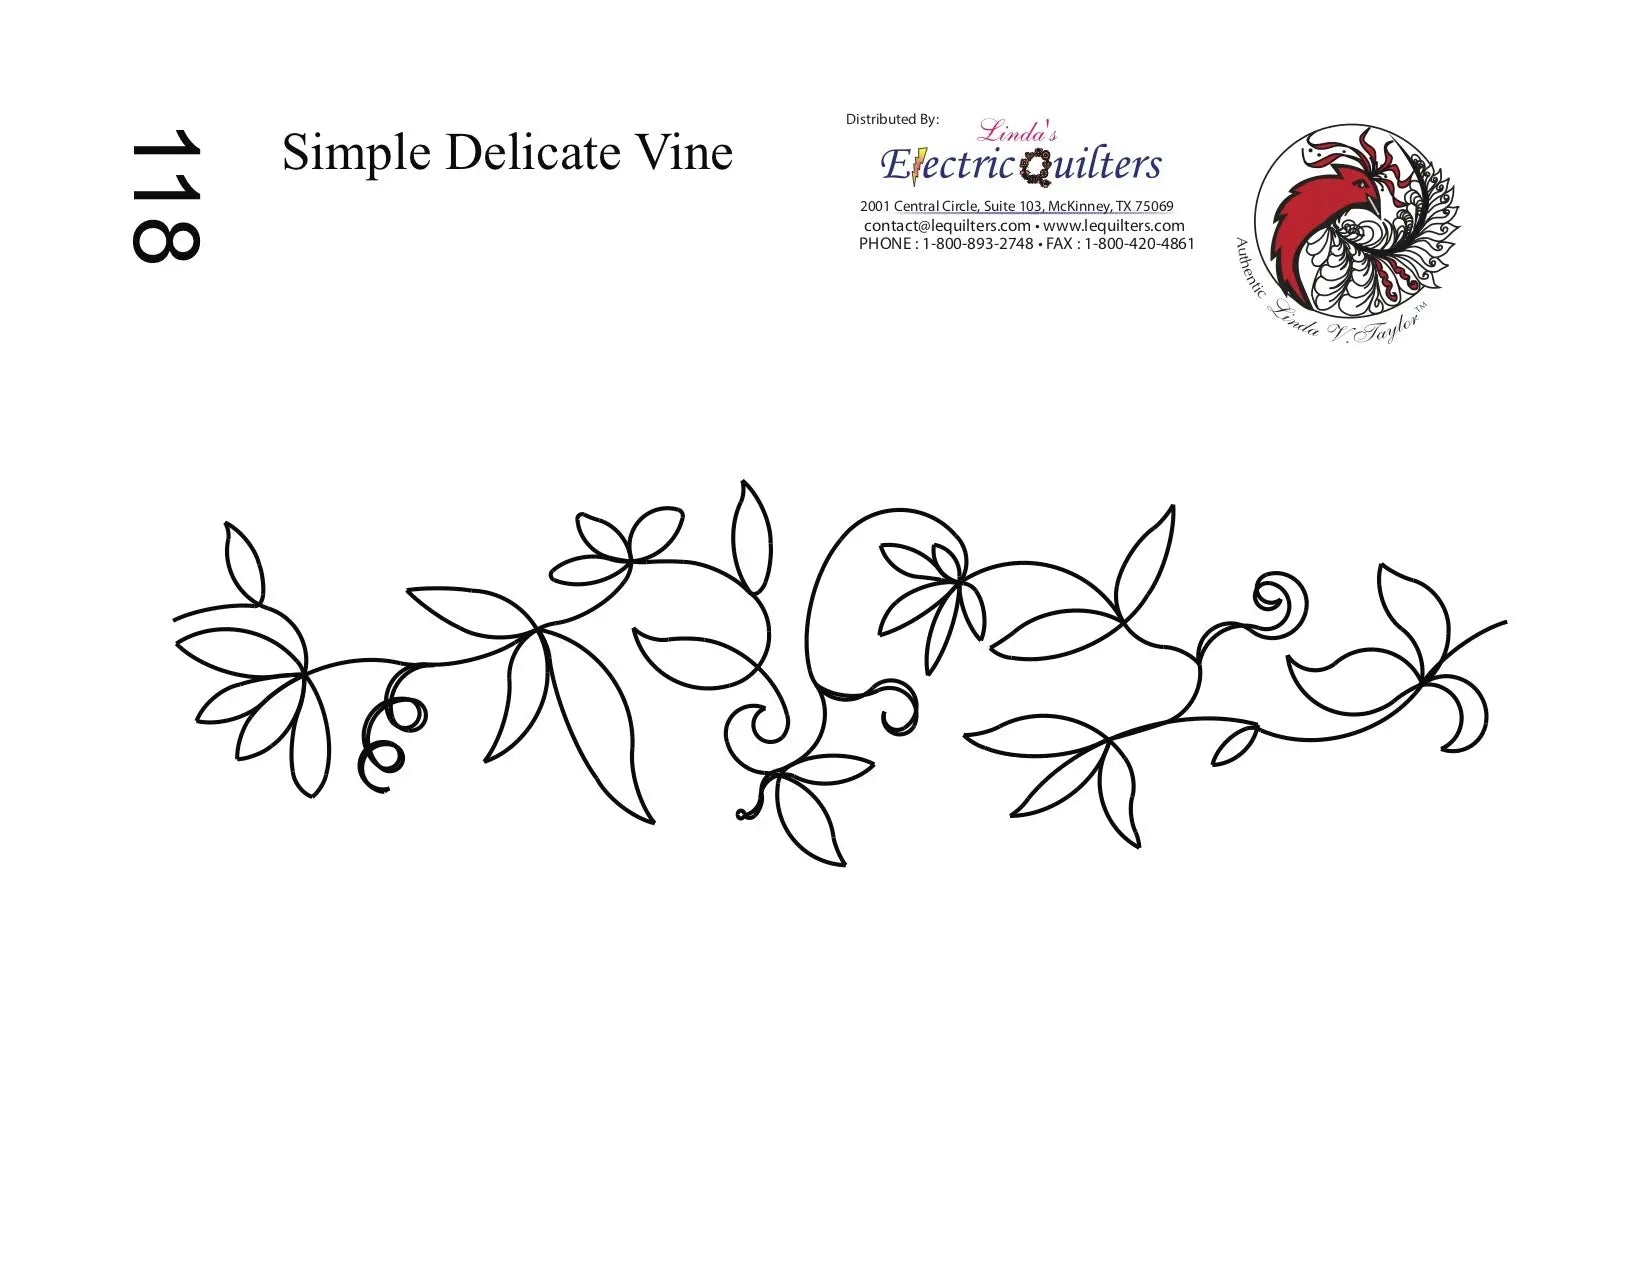 118 Simple Delicate Vines Pantograph by Linda V. Taylor - Linda's Electric Quilters